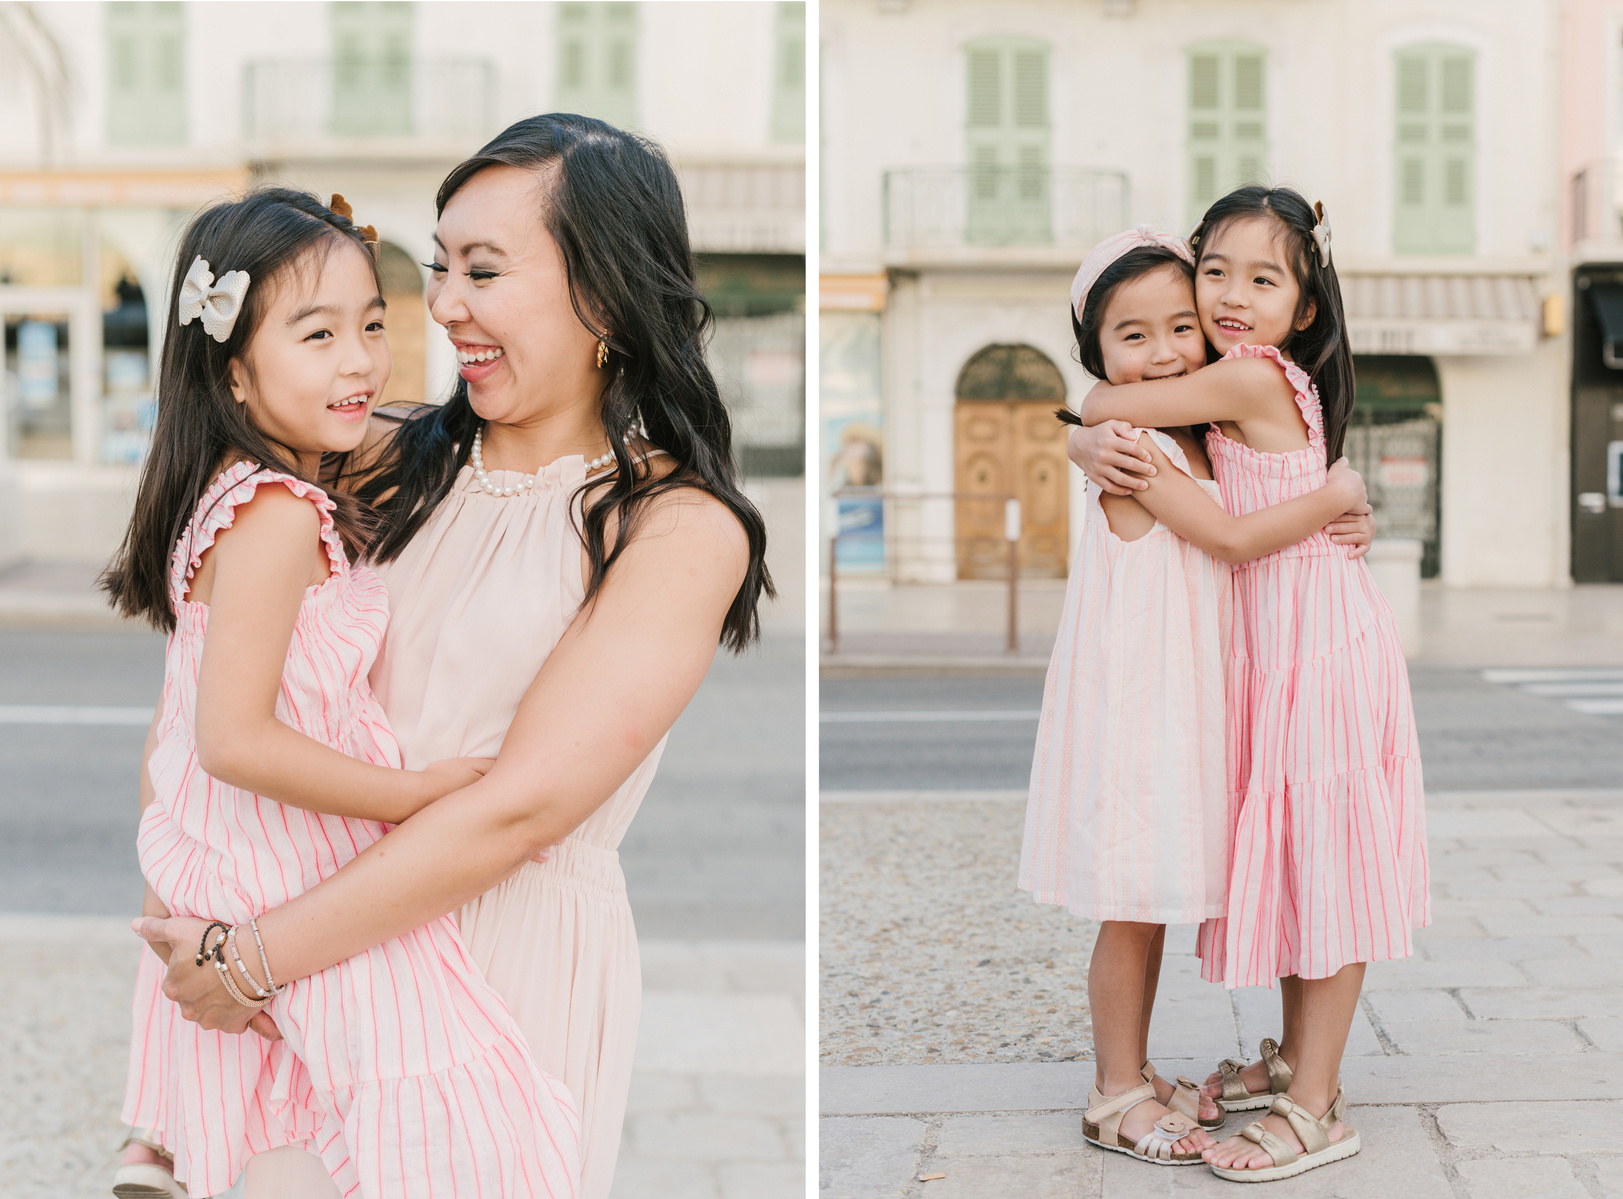 Family photoshoot in Cannes, French Riviera. Provence photographer. France wedding photographer. 